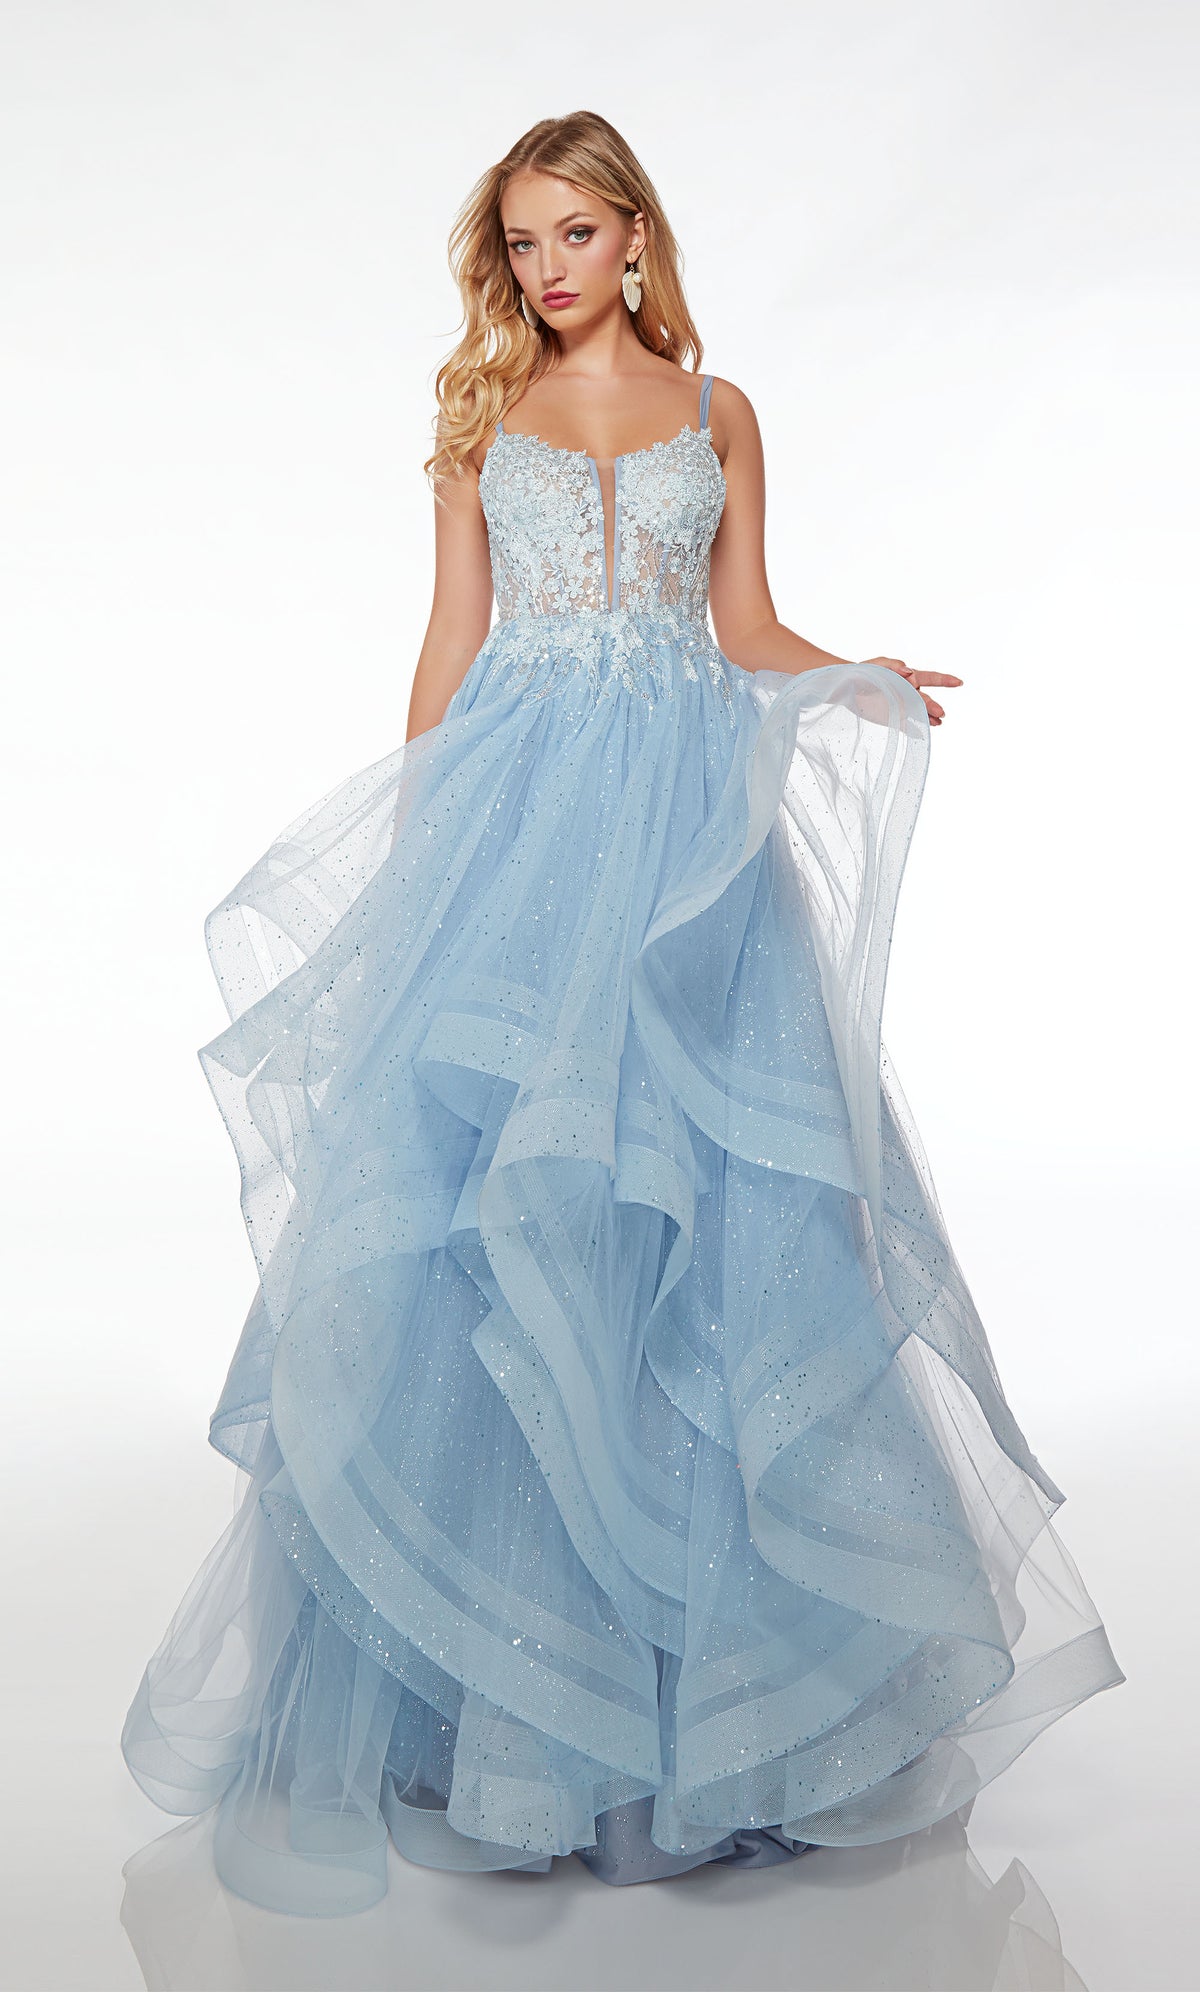 Blue prom dress with an sheer floral lace corset bodice, lace up back, and ruffled skirt in sequined lace-glitter tulle fabric.